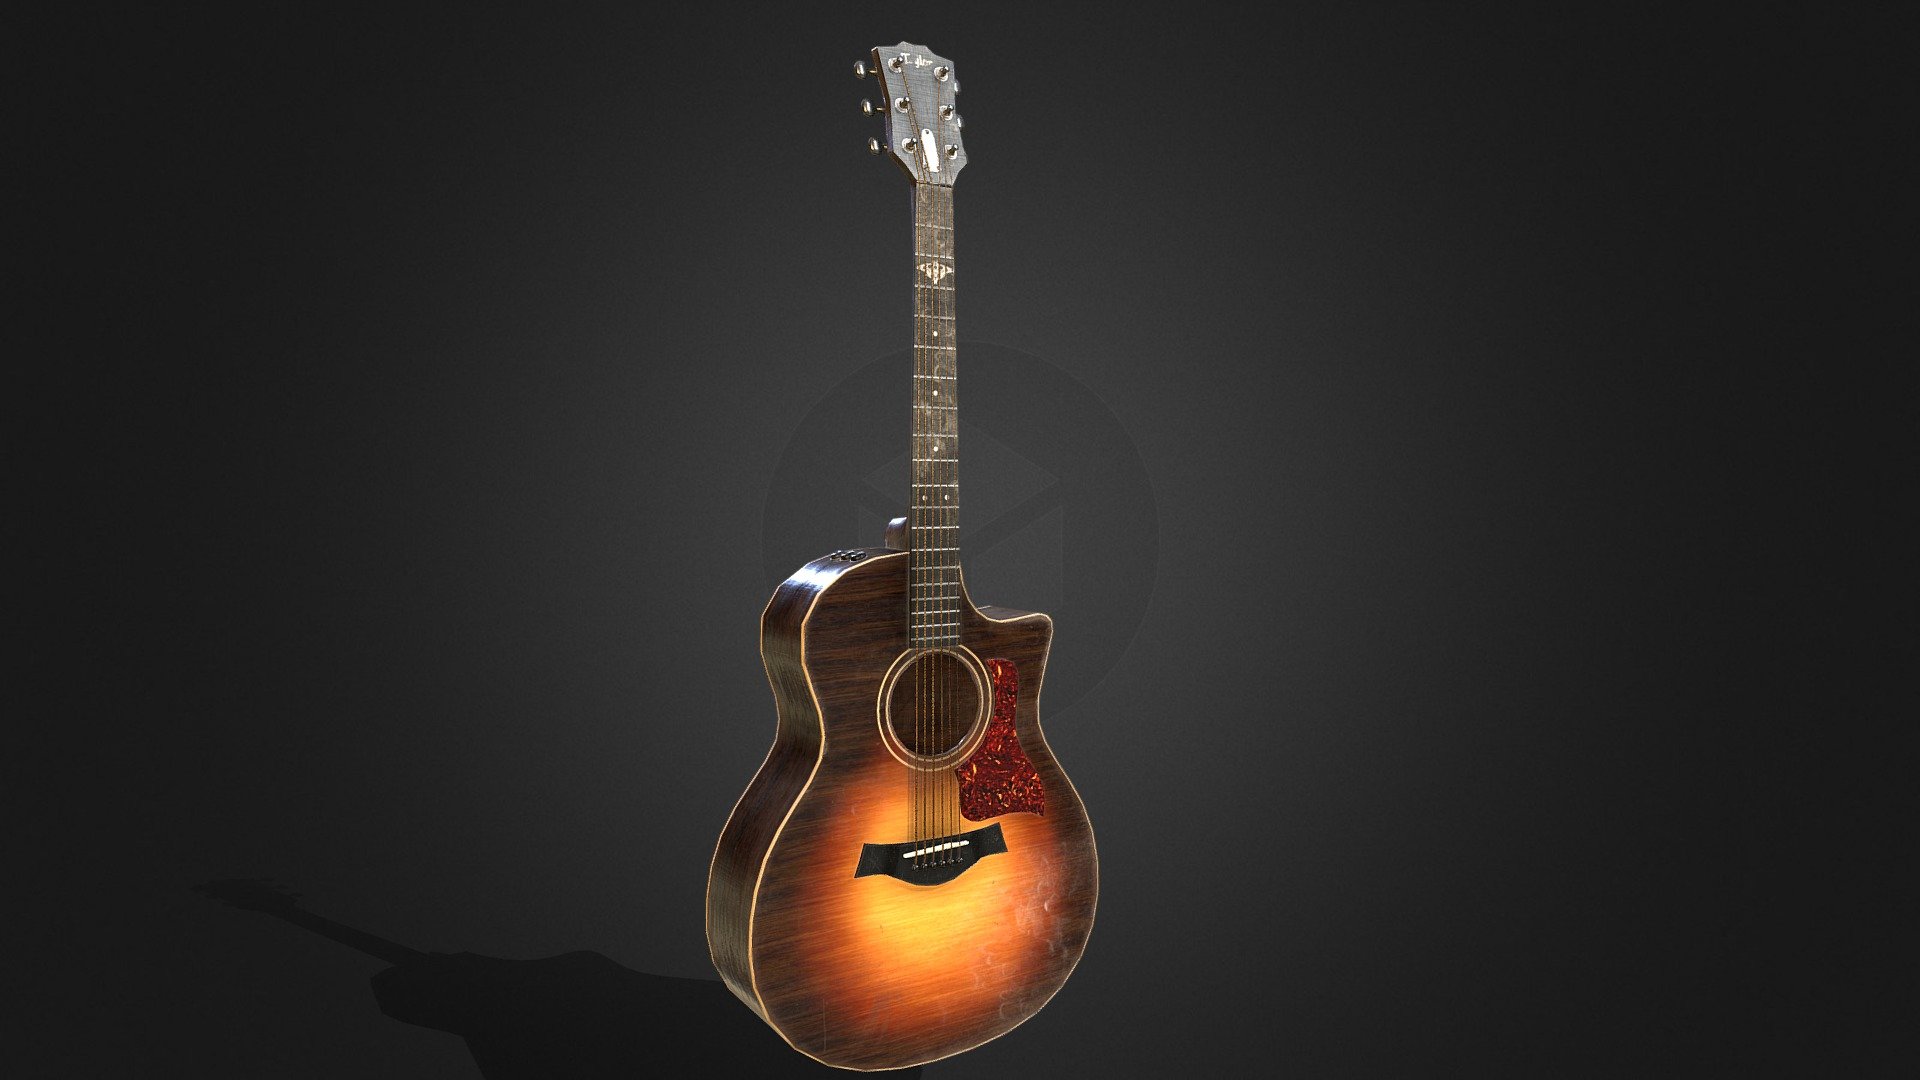 As you can imagine, I like videogames so I decided to create a series of assets of my favorite videogames and this is one of them
This is Taylor's acoustic guitar from Naughty Dog's The Last of Us Part 2 made by me
It's a simple mesh with 11K triangles and 2K textures made in Substance Painter - Taylor Acoustic Guitar TLOU2 - 3D model by Andriy Hrushevskyy (@gho0st3786) 3d model